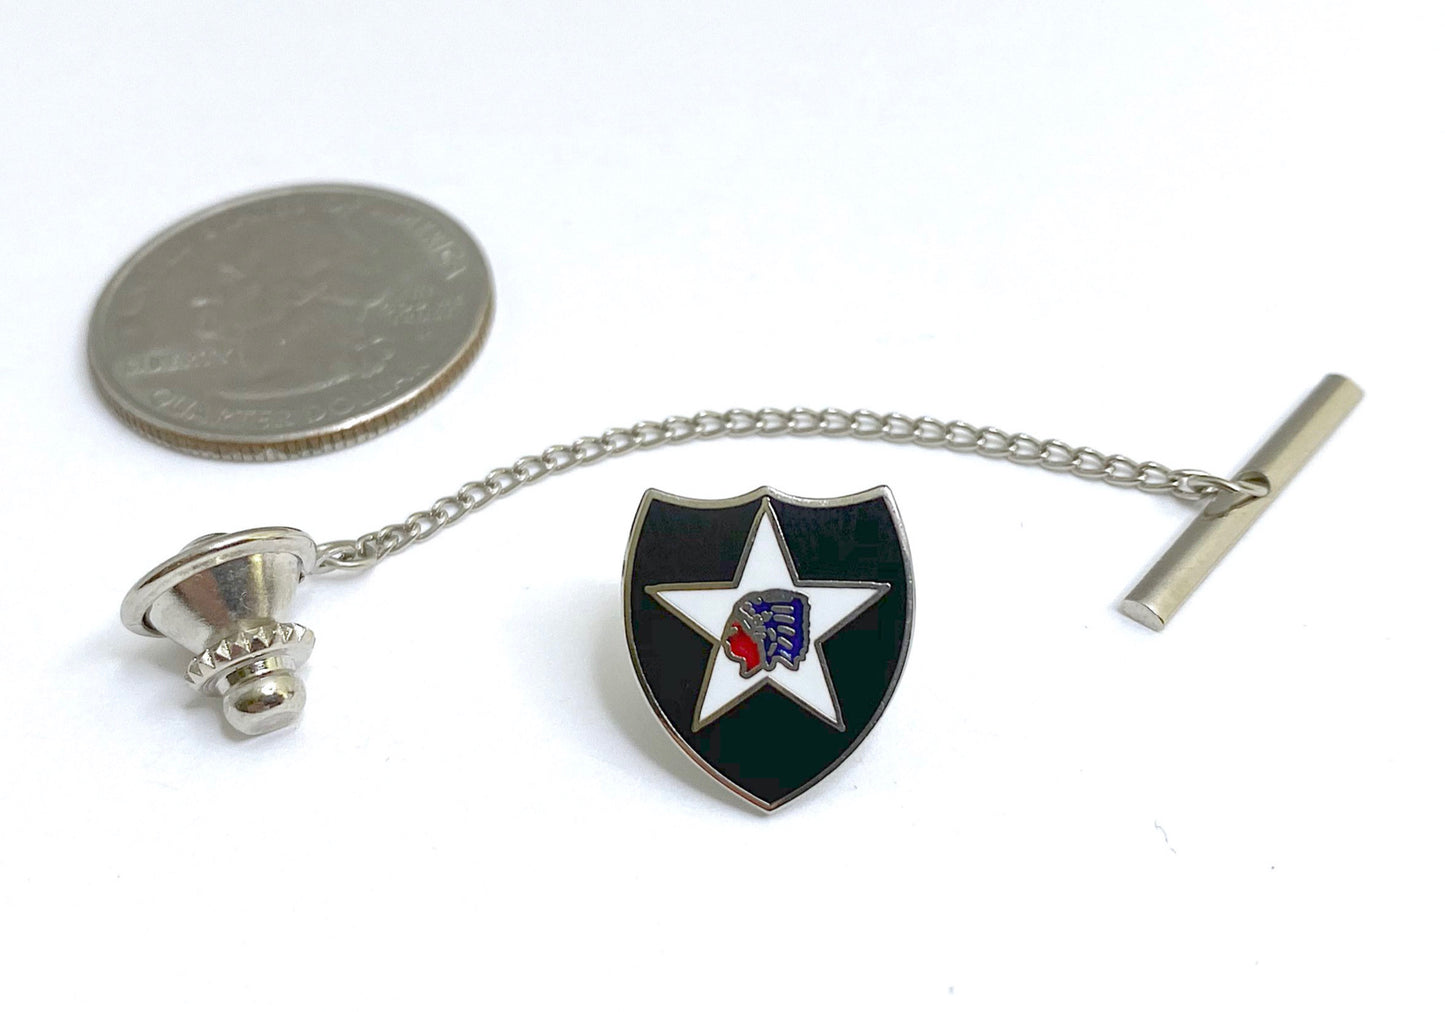 2nd Infantry Division Tie Tack